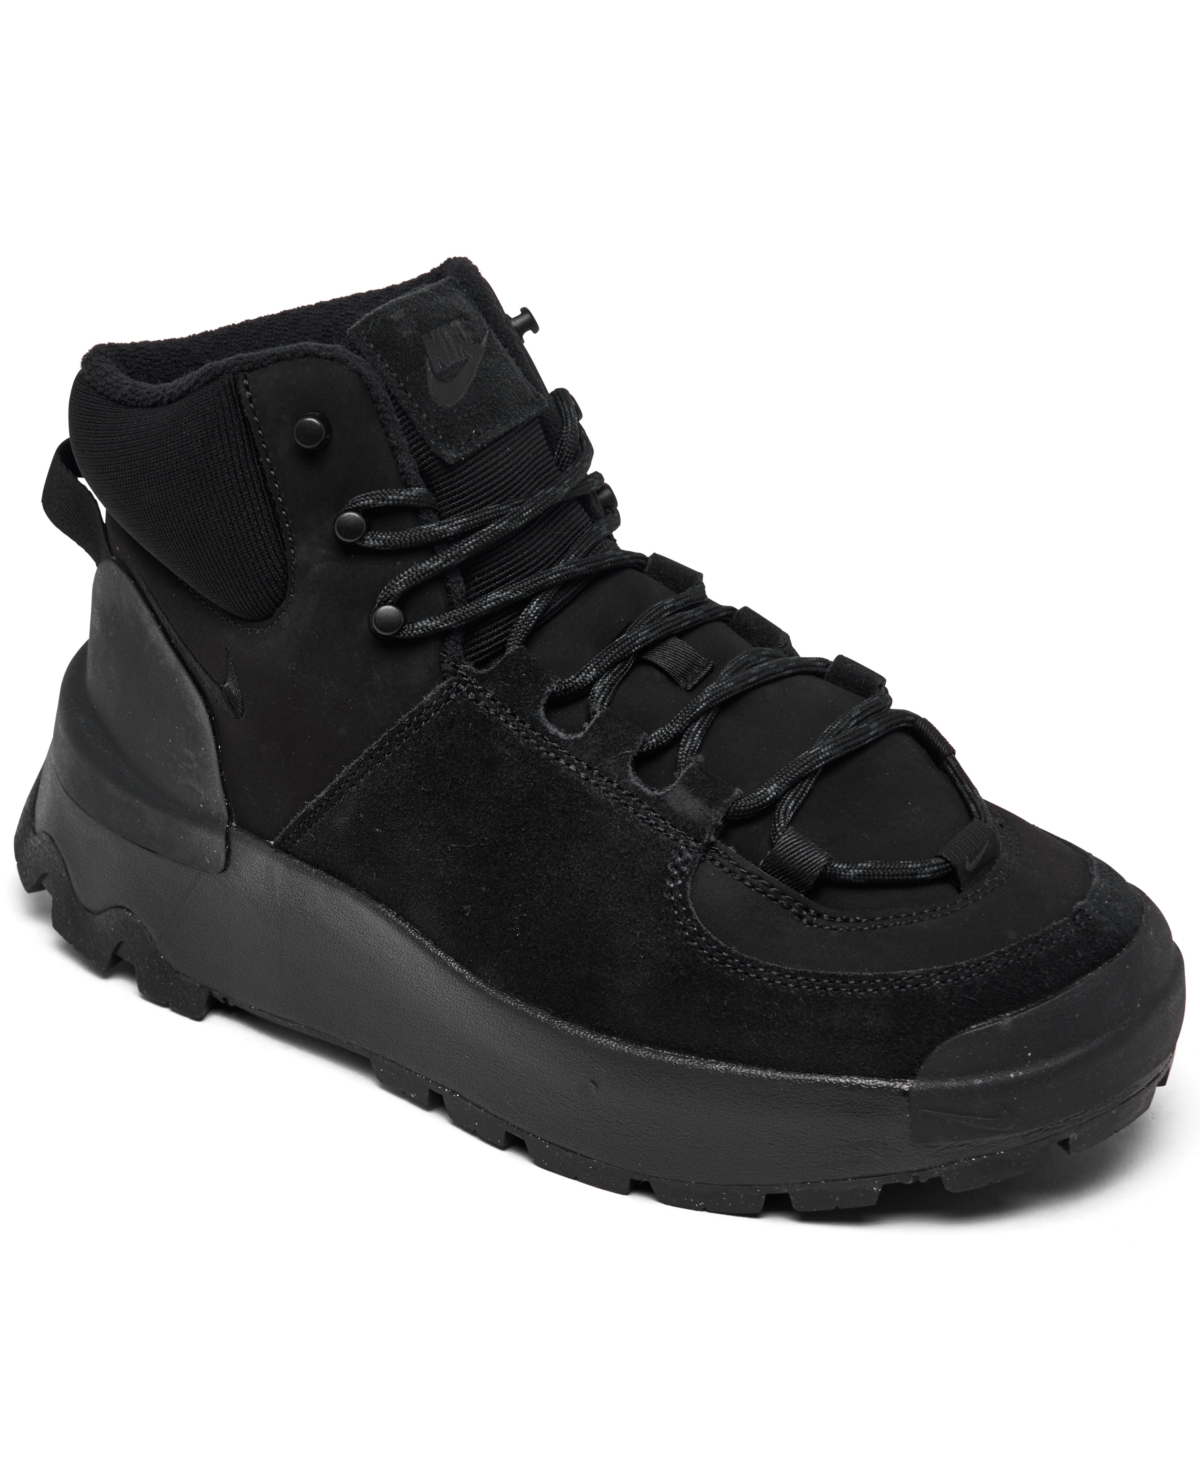 Nike Women's City Classic Sneaker Boots From Finish Line In Black/black/black/anthracite 